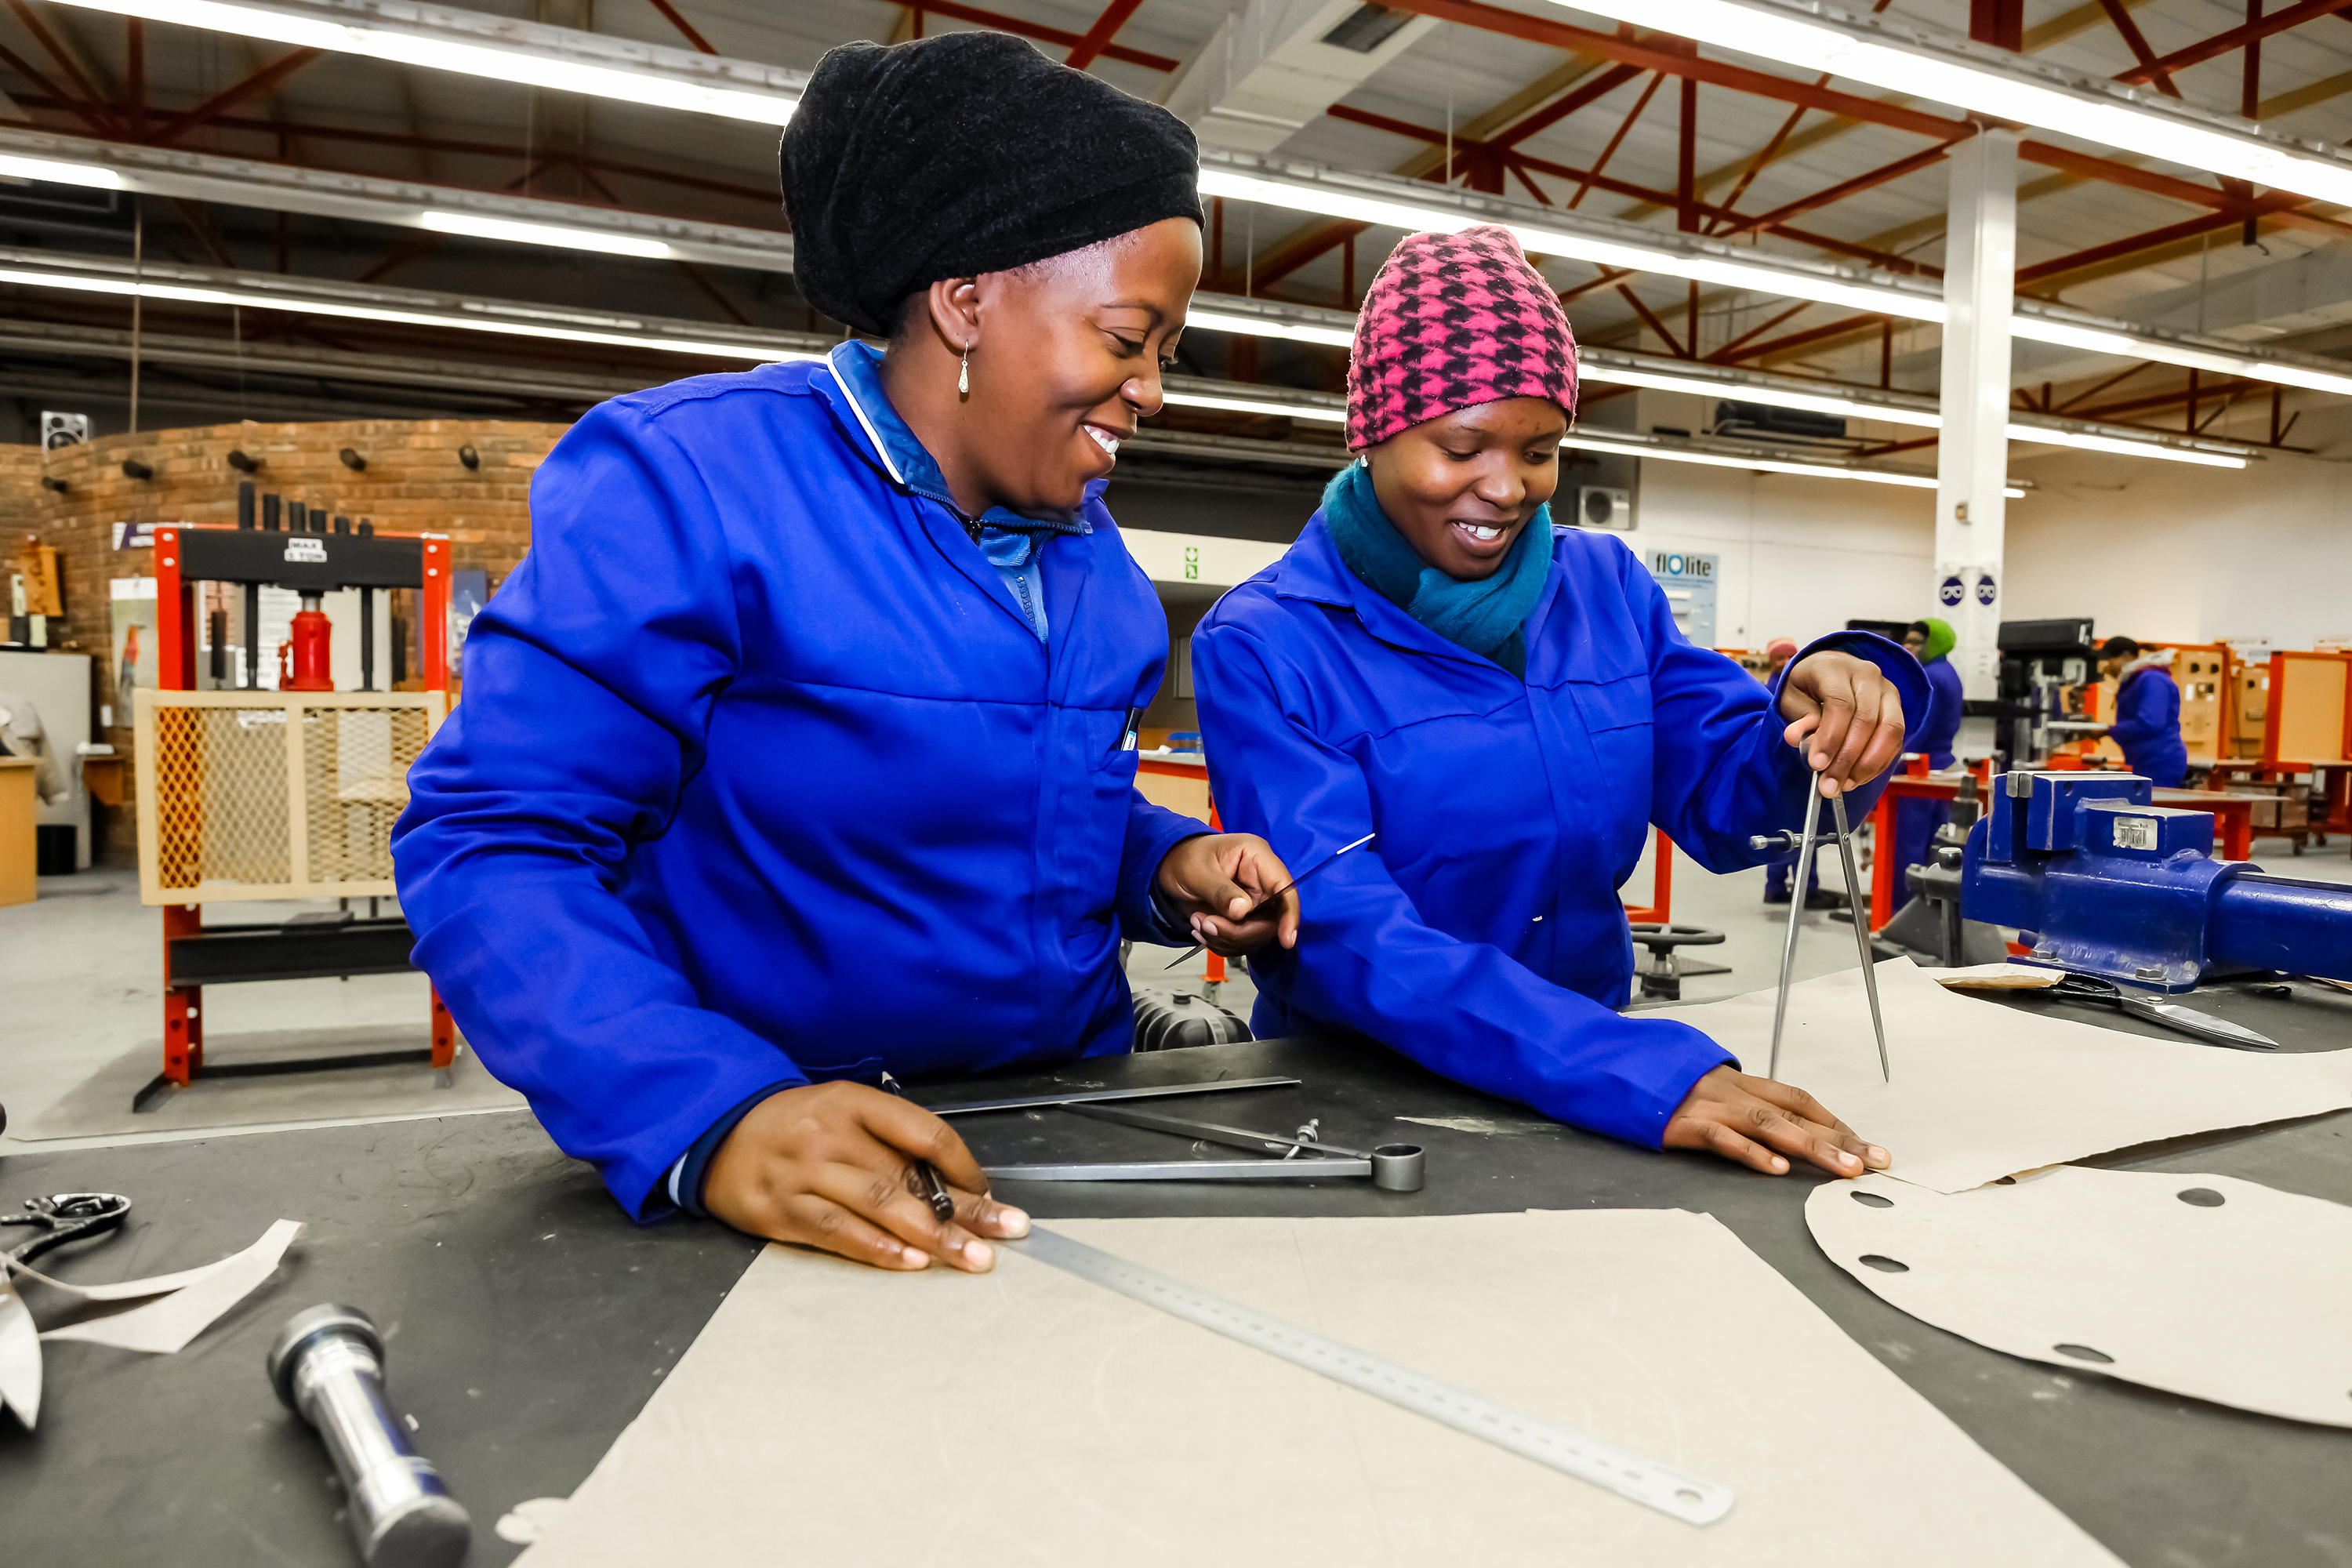 Women working together, focusing on skills